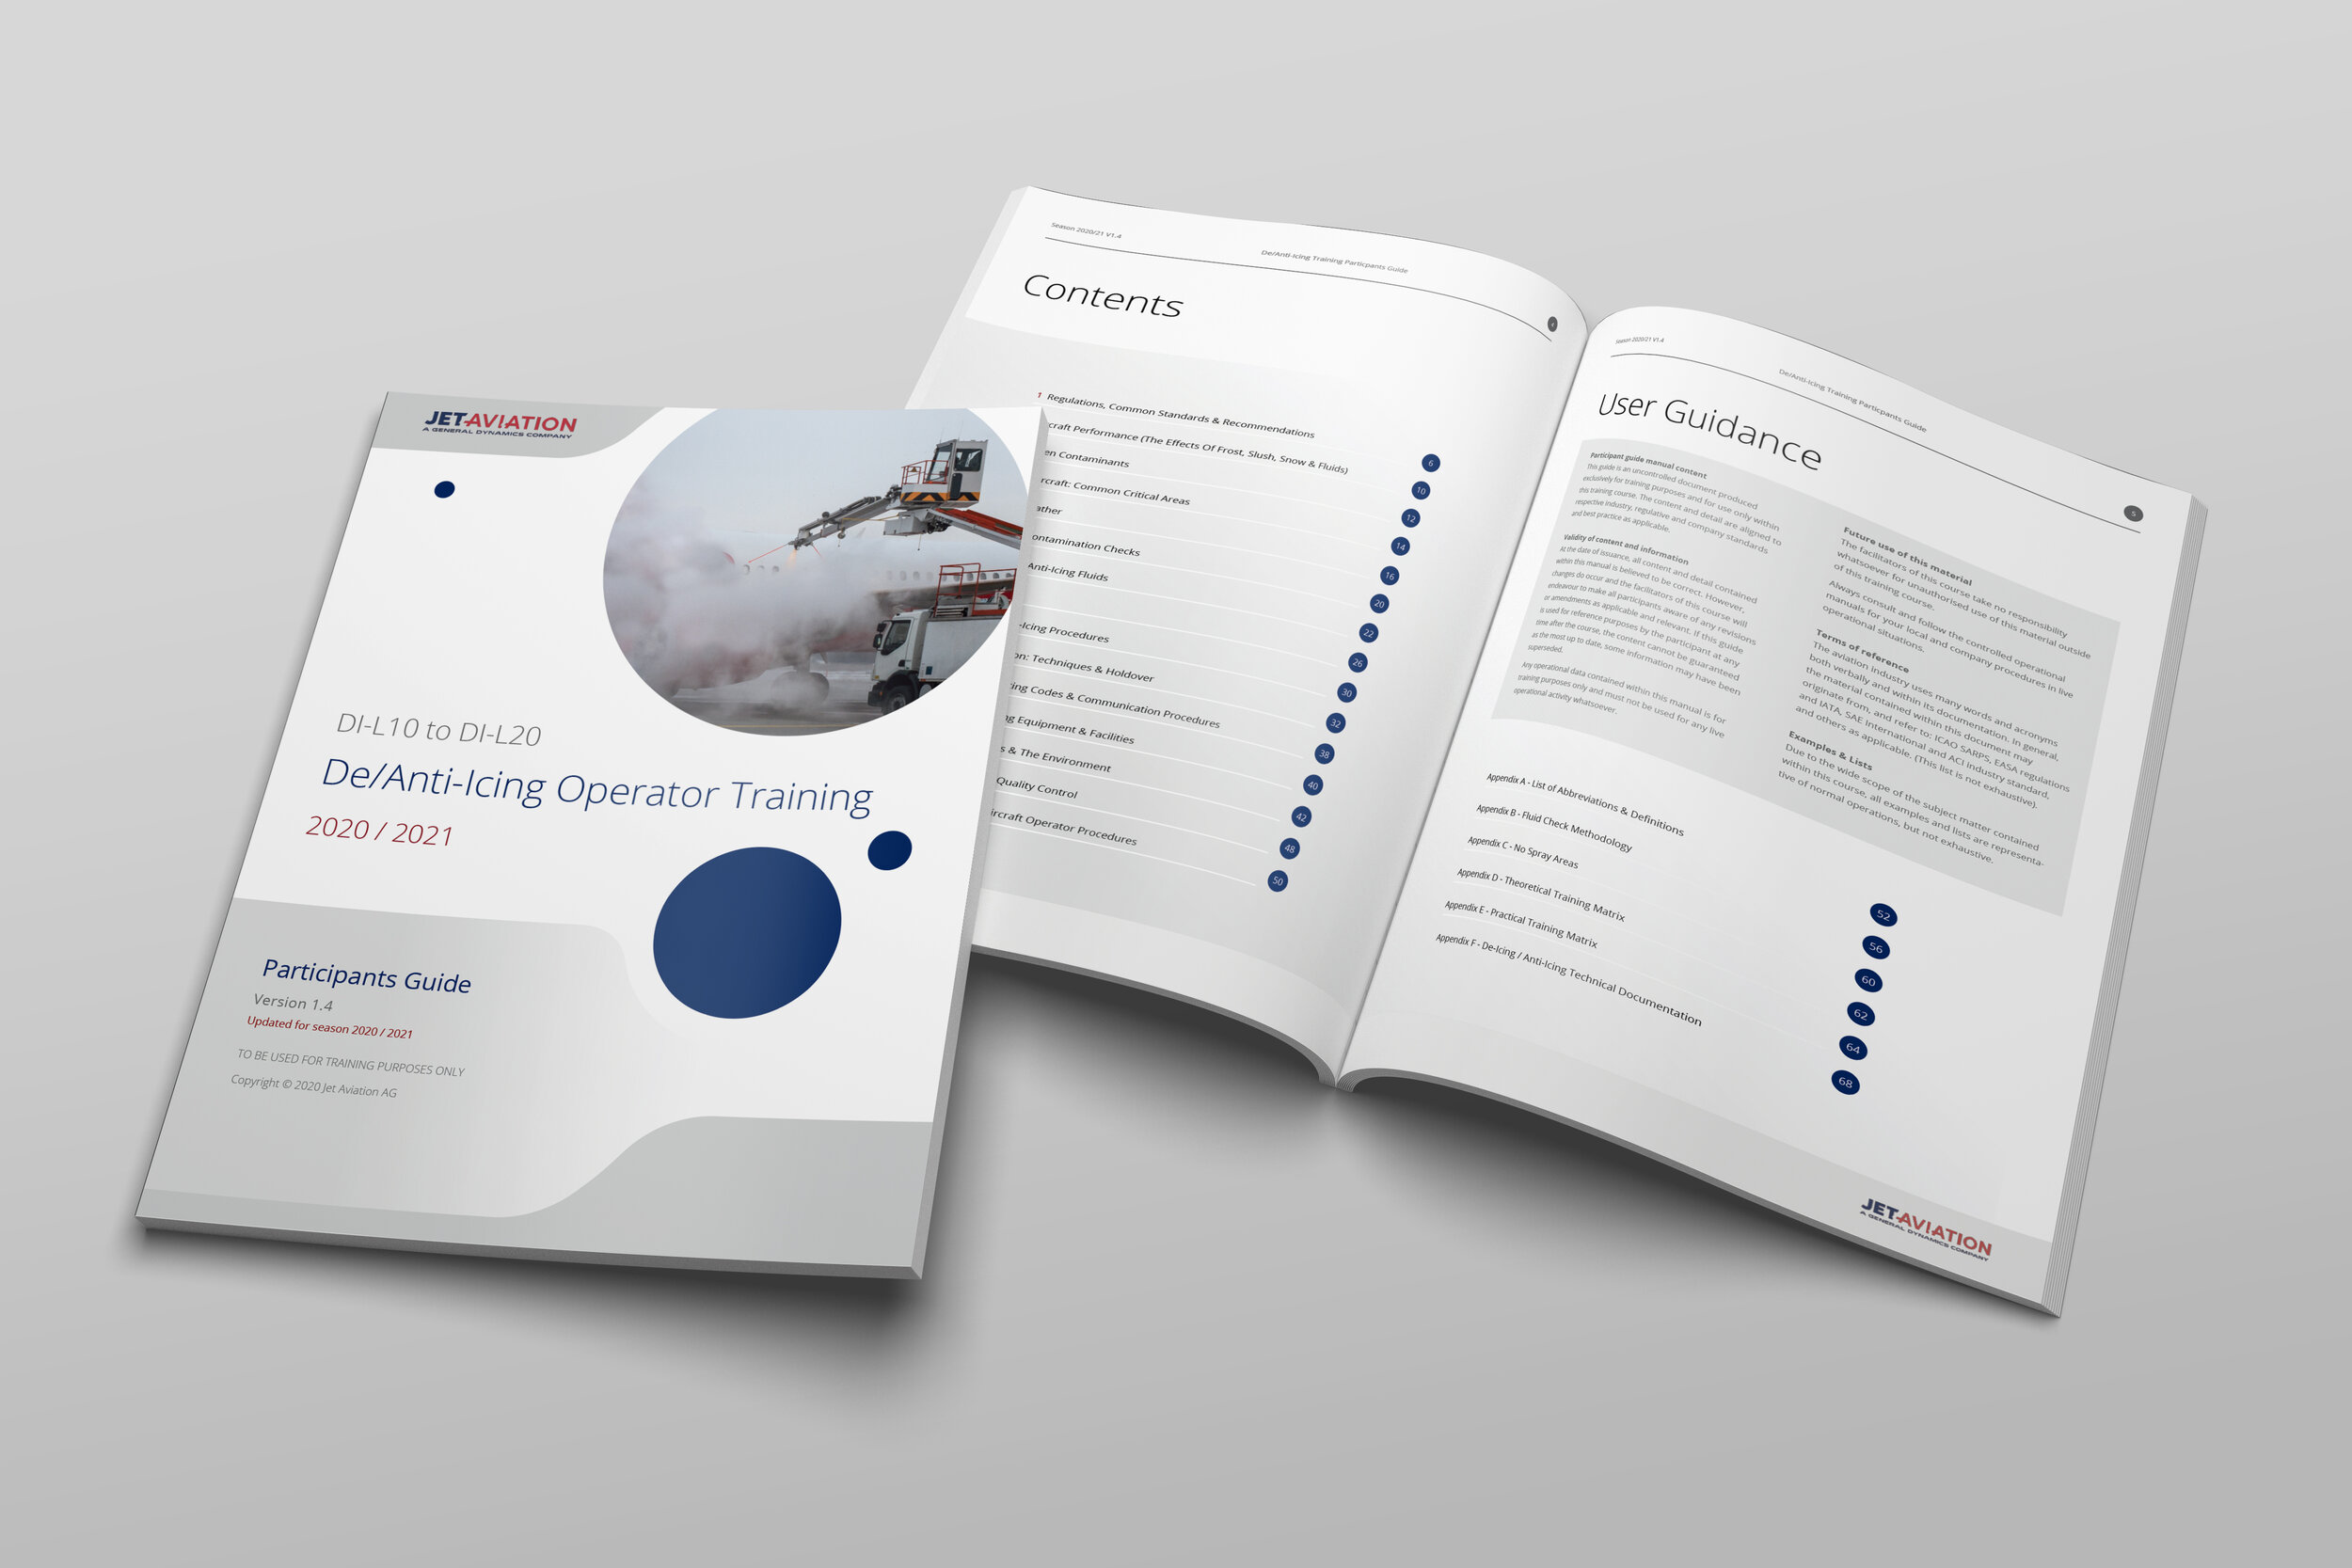 De/Anti-Icing Operator Training Participants Guide. All Content of the document and design produced bespoke for Jet Aviation Ltd.